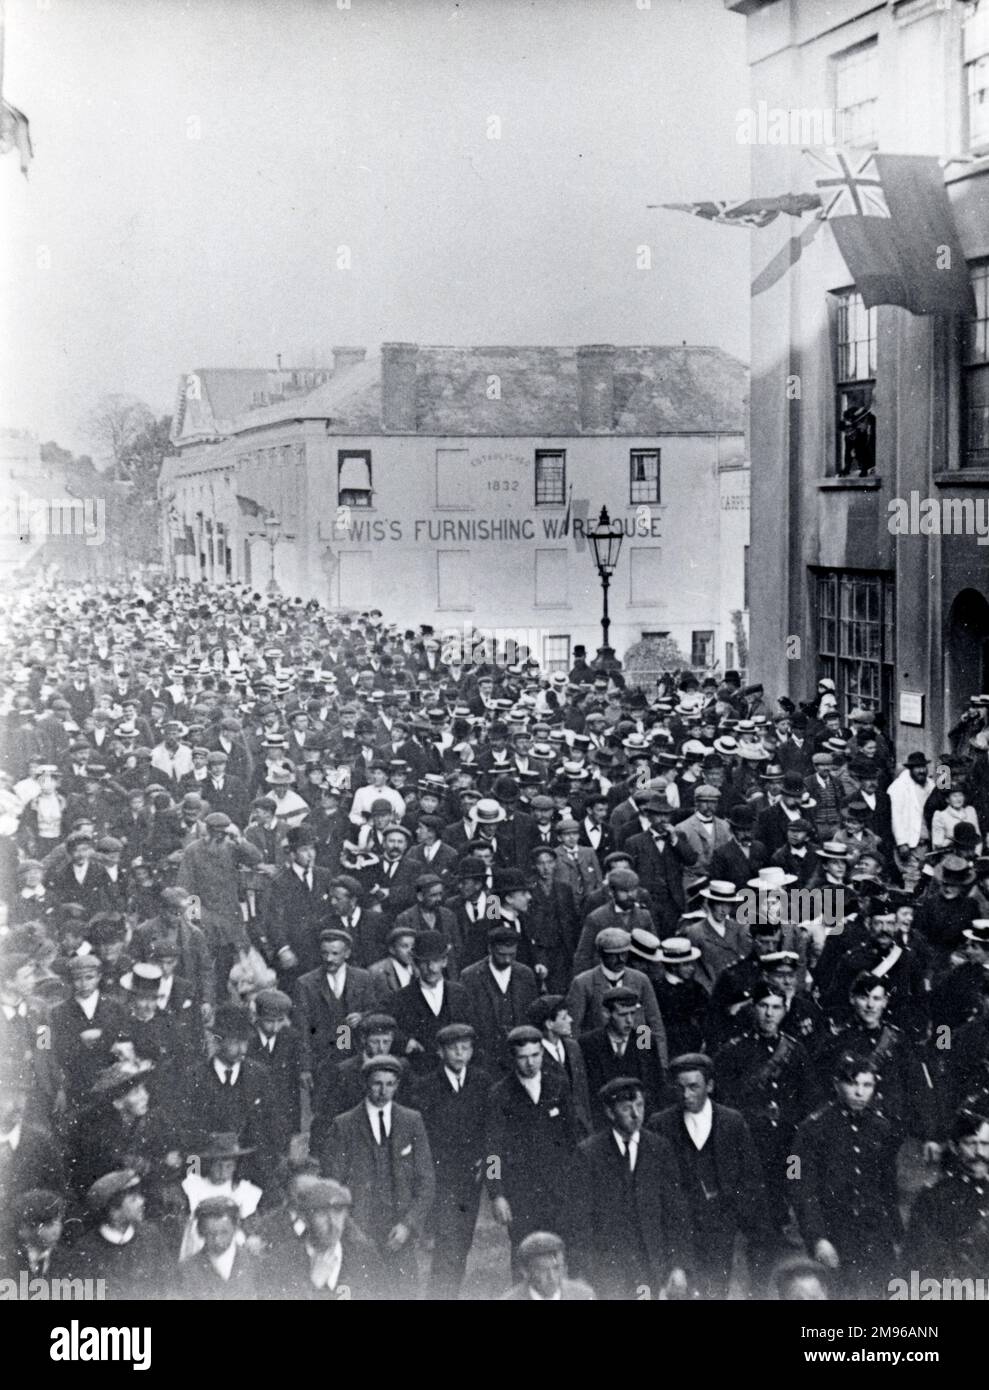 Crowds of people in the roadway at Victoria Place, Haverfordwest, Pembrokeshire, Dyfed, South Wales, probably during a circus procession.  Lewis's Furnishing Warehouse can be seen in the background. Stock Photo